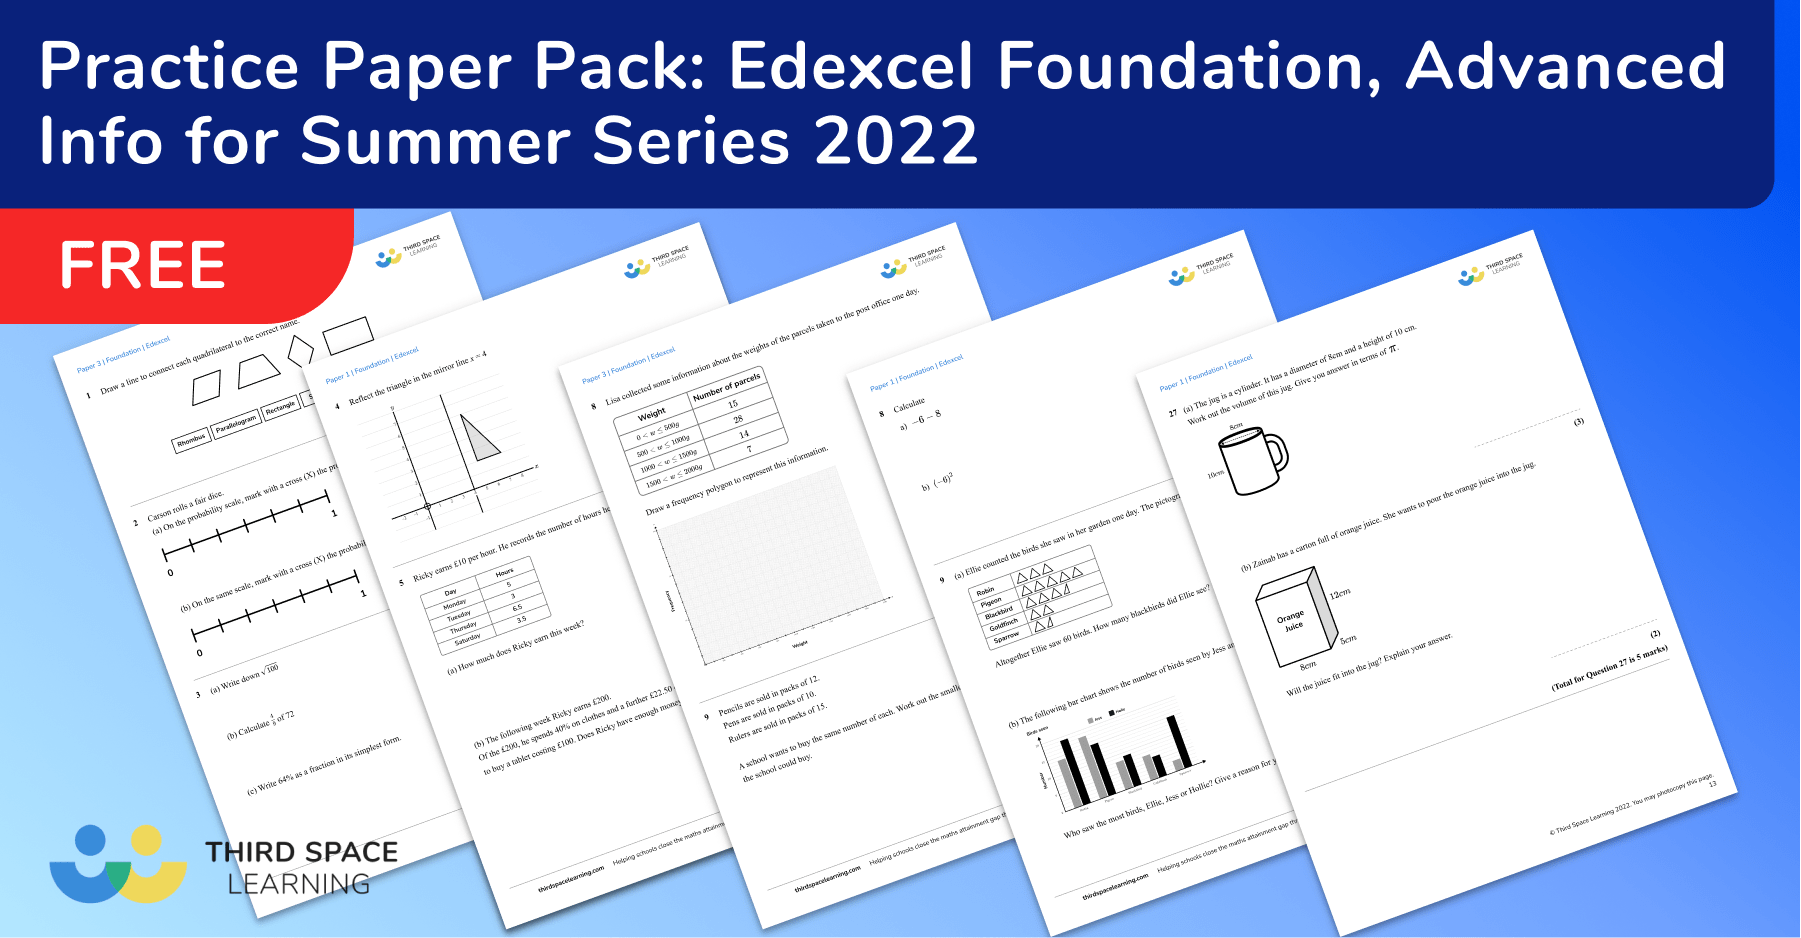 Practice Paper Pack: Edexcel Foundation, Advanced Info for Summer Series 2022